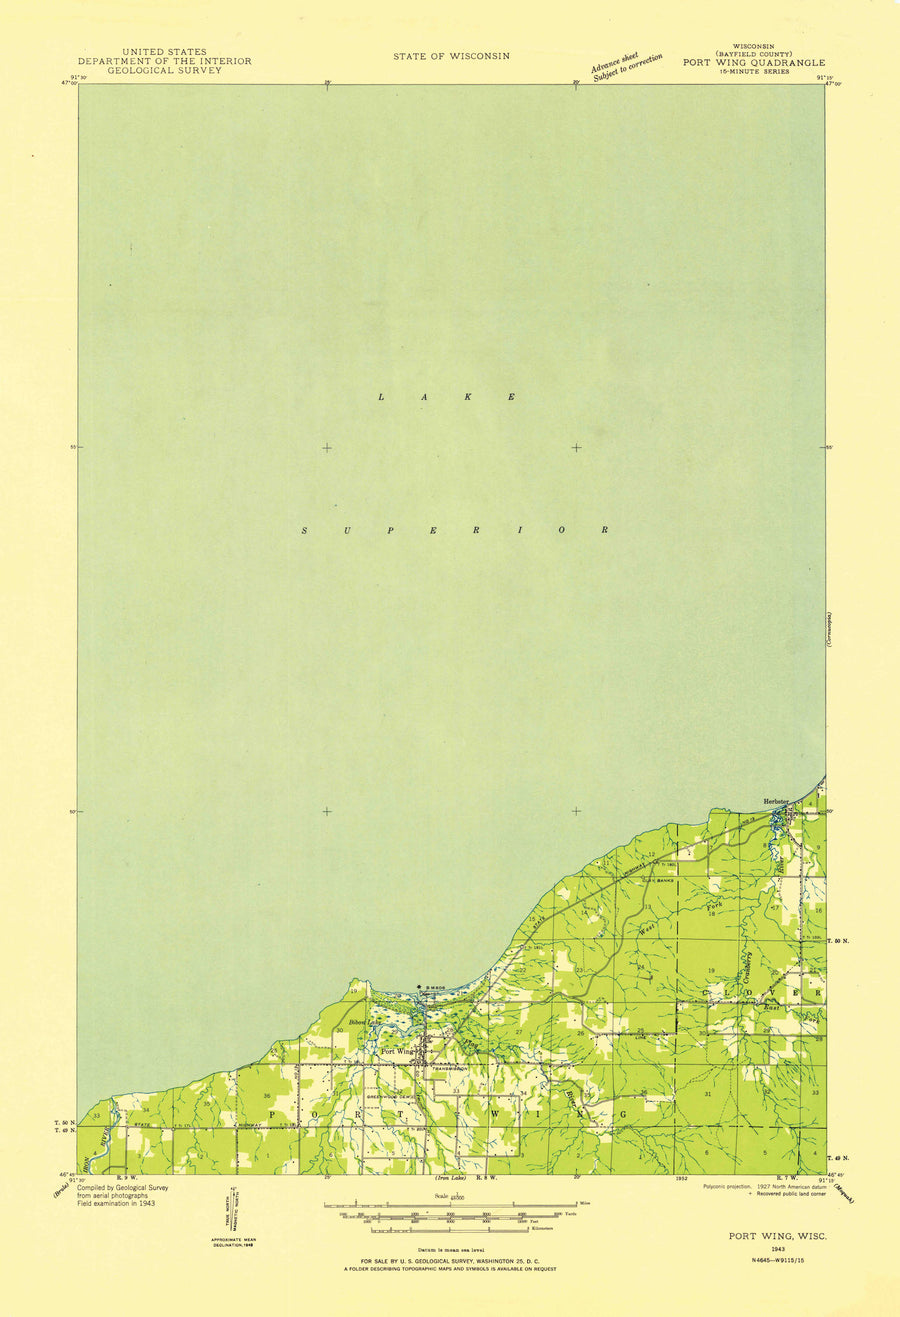 Port Wing Wisconsin Topographic Map - 1943